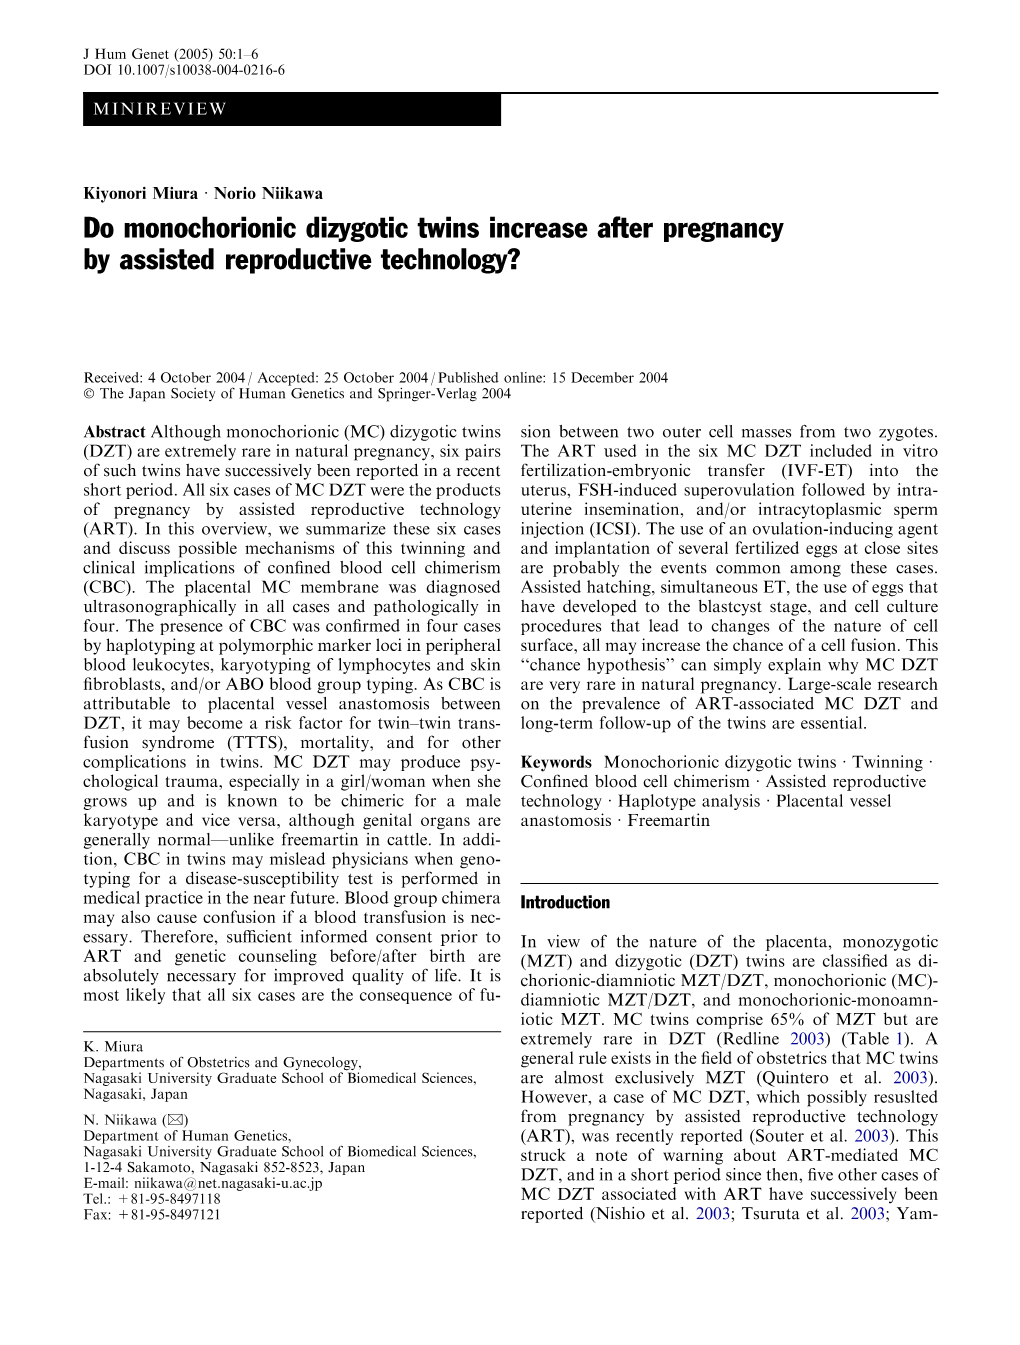 Do Monochorionic Dizygotic Twins Increase After Pregnancy by Assisted Reproductive Technology?